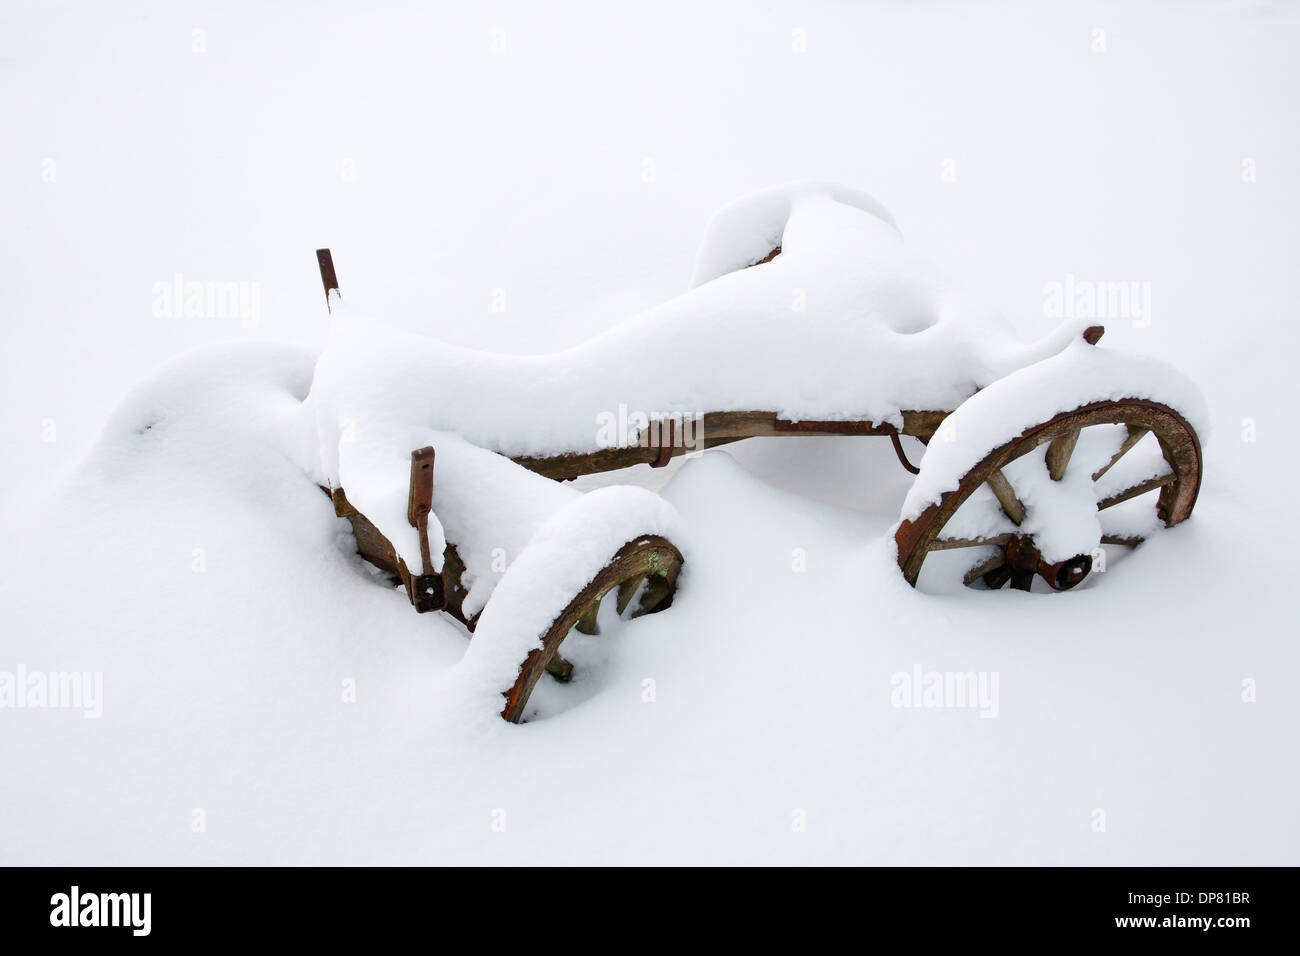 Image of an old wooden Wagon standing in snow, Estonia Europe Stock Photo